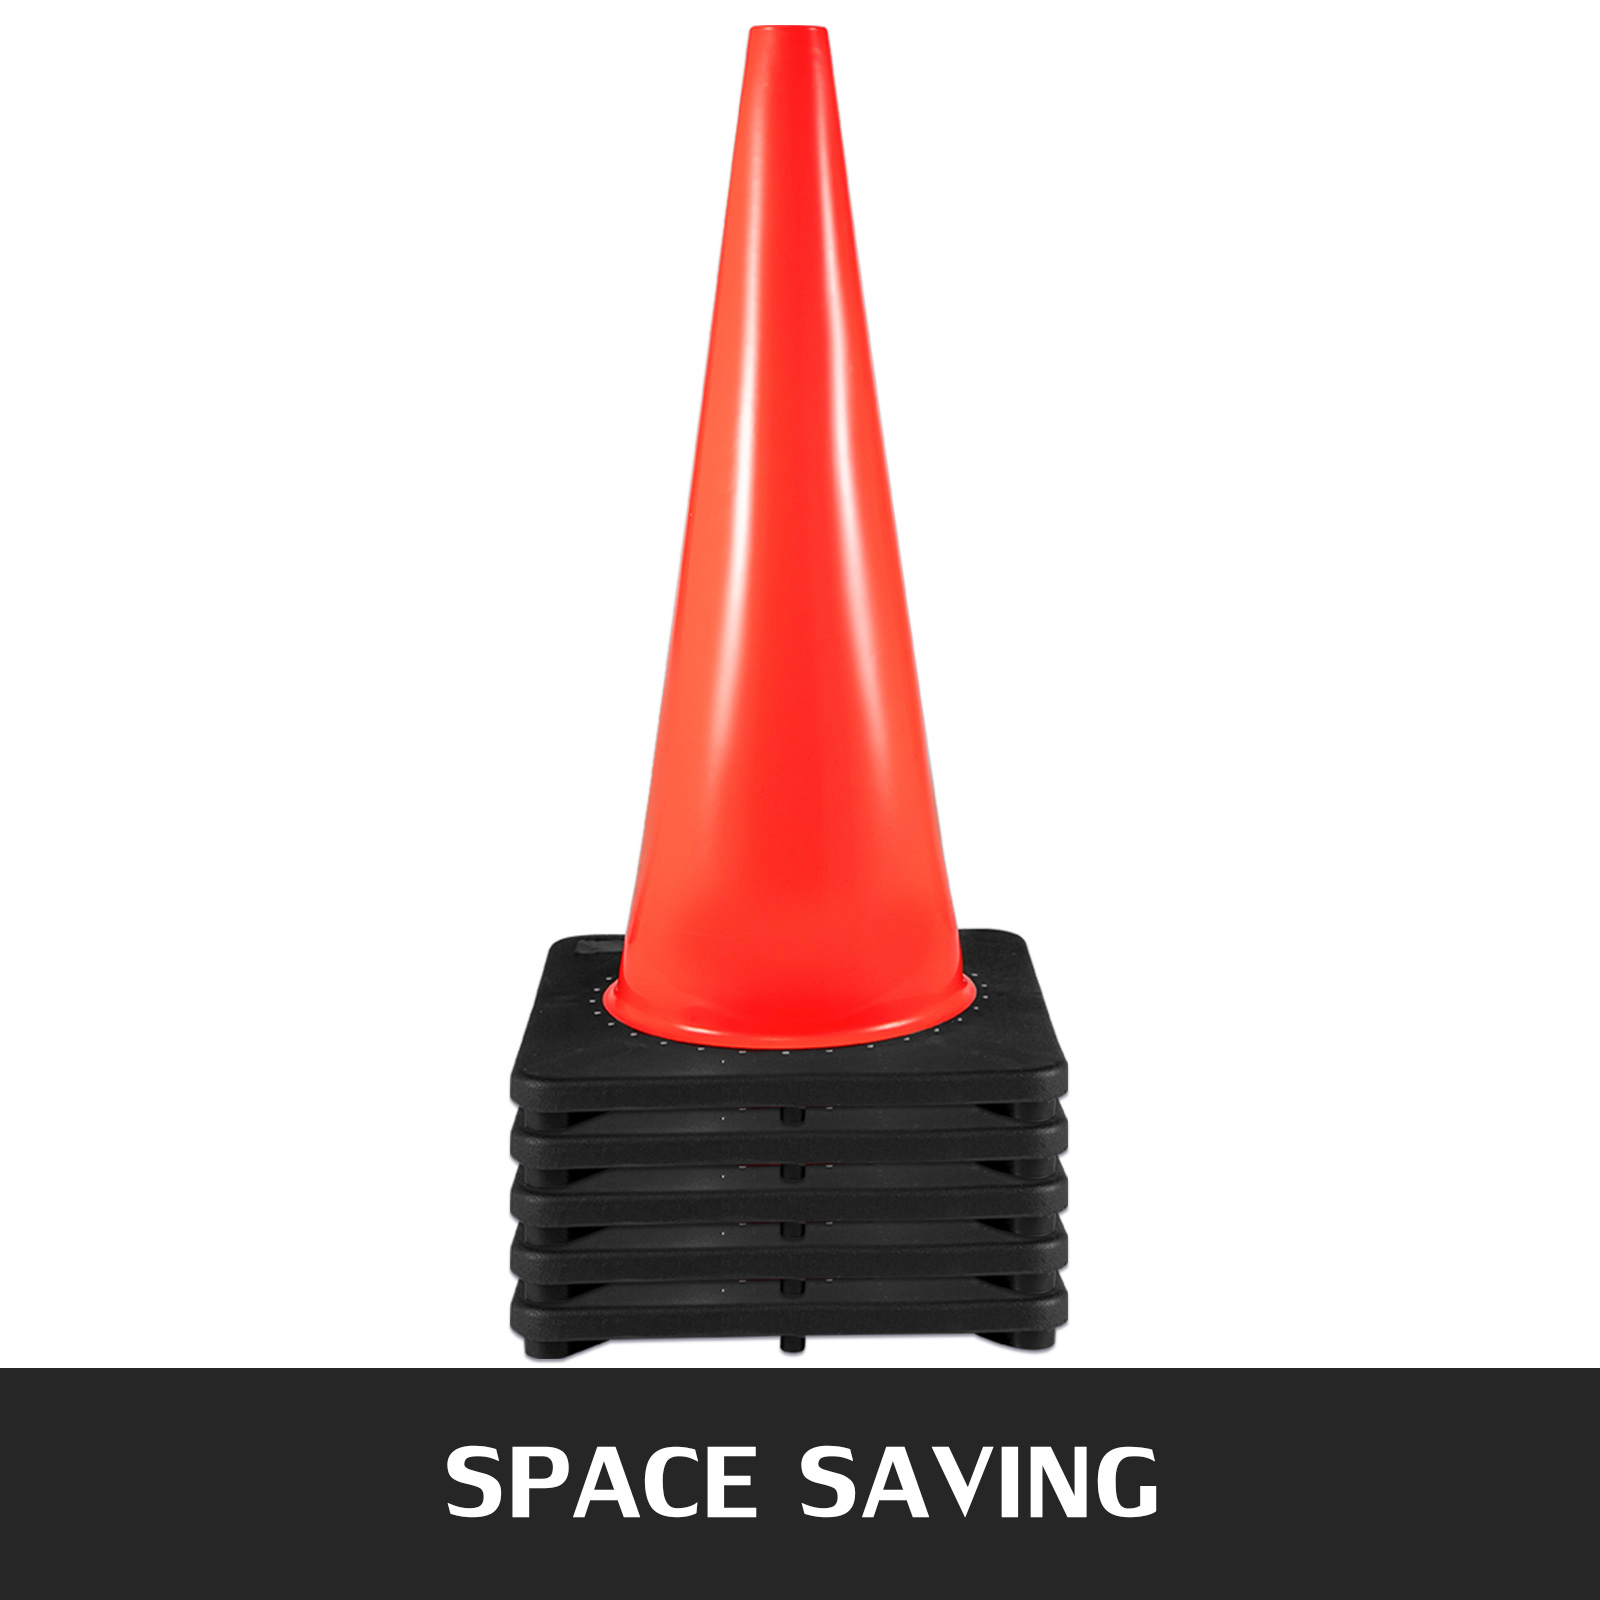 Details about   Traffic Cones Safety Cones Parking Cones Warning Roads Construction Sites